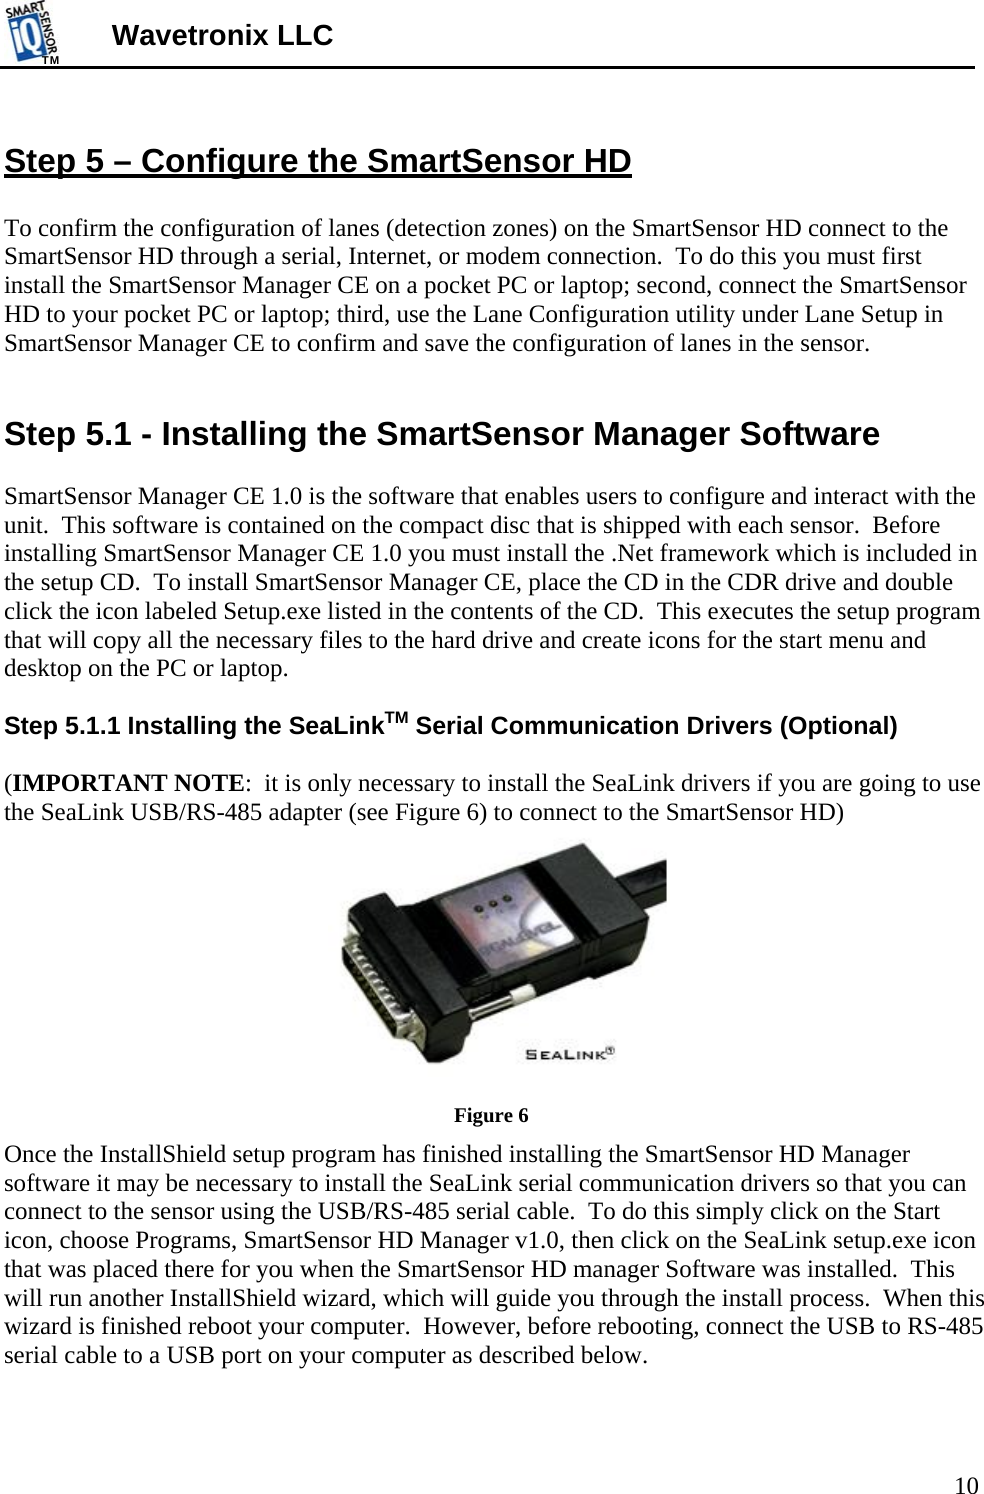 TMTM  10 Wavetronix LLC      Step 5 – Configure the SmartSensor HD  To confirm the configuration of lanes (detection zones) on the SmartSensor HD connect to the SmartSensor HD through a serial, Internet, or modem connection.  To do this you must first install the SmartSensor Manager CE on a pocket PC or laptop; second, connect the SmartSensor HD to your pocket PC or laptop; third, use the Lane Configuration utility under Lane Setup in SmartSensor Manager CE to confirm and save the configuration of lanes in the sensor.   Step 5.1 - Installing the SmartSensor Manager Software  SmartSensor Manager CE 1.0 is the software that enables users to configure and interact with the unit.  This software is contained on the compact disc that is shipped with each sensor.  Before installing SmartSensor Manager CE 1.0 you must install the .Net framework which is included in the setup CD.  To install SmartSensor Manager CE, place the CD in the CDR drive and double click the icon labeled Setup.exe listed in the contents of the CD.  This executes the setup program that will copy all the necessary files to the hard drive and create icons for the start menu and desktop on the PC or laptop.    Step 5.1.1 Installing the SeaLinkTM Serial Communication Drivers (Optional)  (IMPORTANT NOTE:  it is only necessary to install the SeaLink drivers if you are going to use the SeaLink USB/RS-485 adapter (see Figure 6) to connect to the SmartSensor HD)  Figure 6 Once the InstallShield setup program has finished installing the SmartSensor HD Manager software it may be necessary to install the SeaLink serial communication drivers so that you can connect to the sensor using the USB/RS-485 serial cable.  To do this simply click on the Start icon, choose Programs, SmartSensor HD Manager v1.0, then click on the SeaLink setup.exe icon that was placed there for you when the SmartSensor HD manager Software was installed.  This will run another InstallShield wizard, which will guide you through the install process.  When this wizard is finished reboot your computer.  However, before rebooting, connect the USB to RS-485 serial cable to a USB port on your computer as described below.  